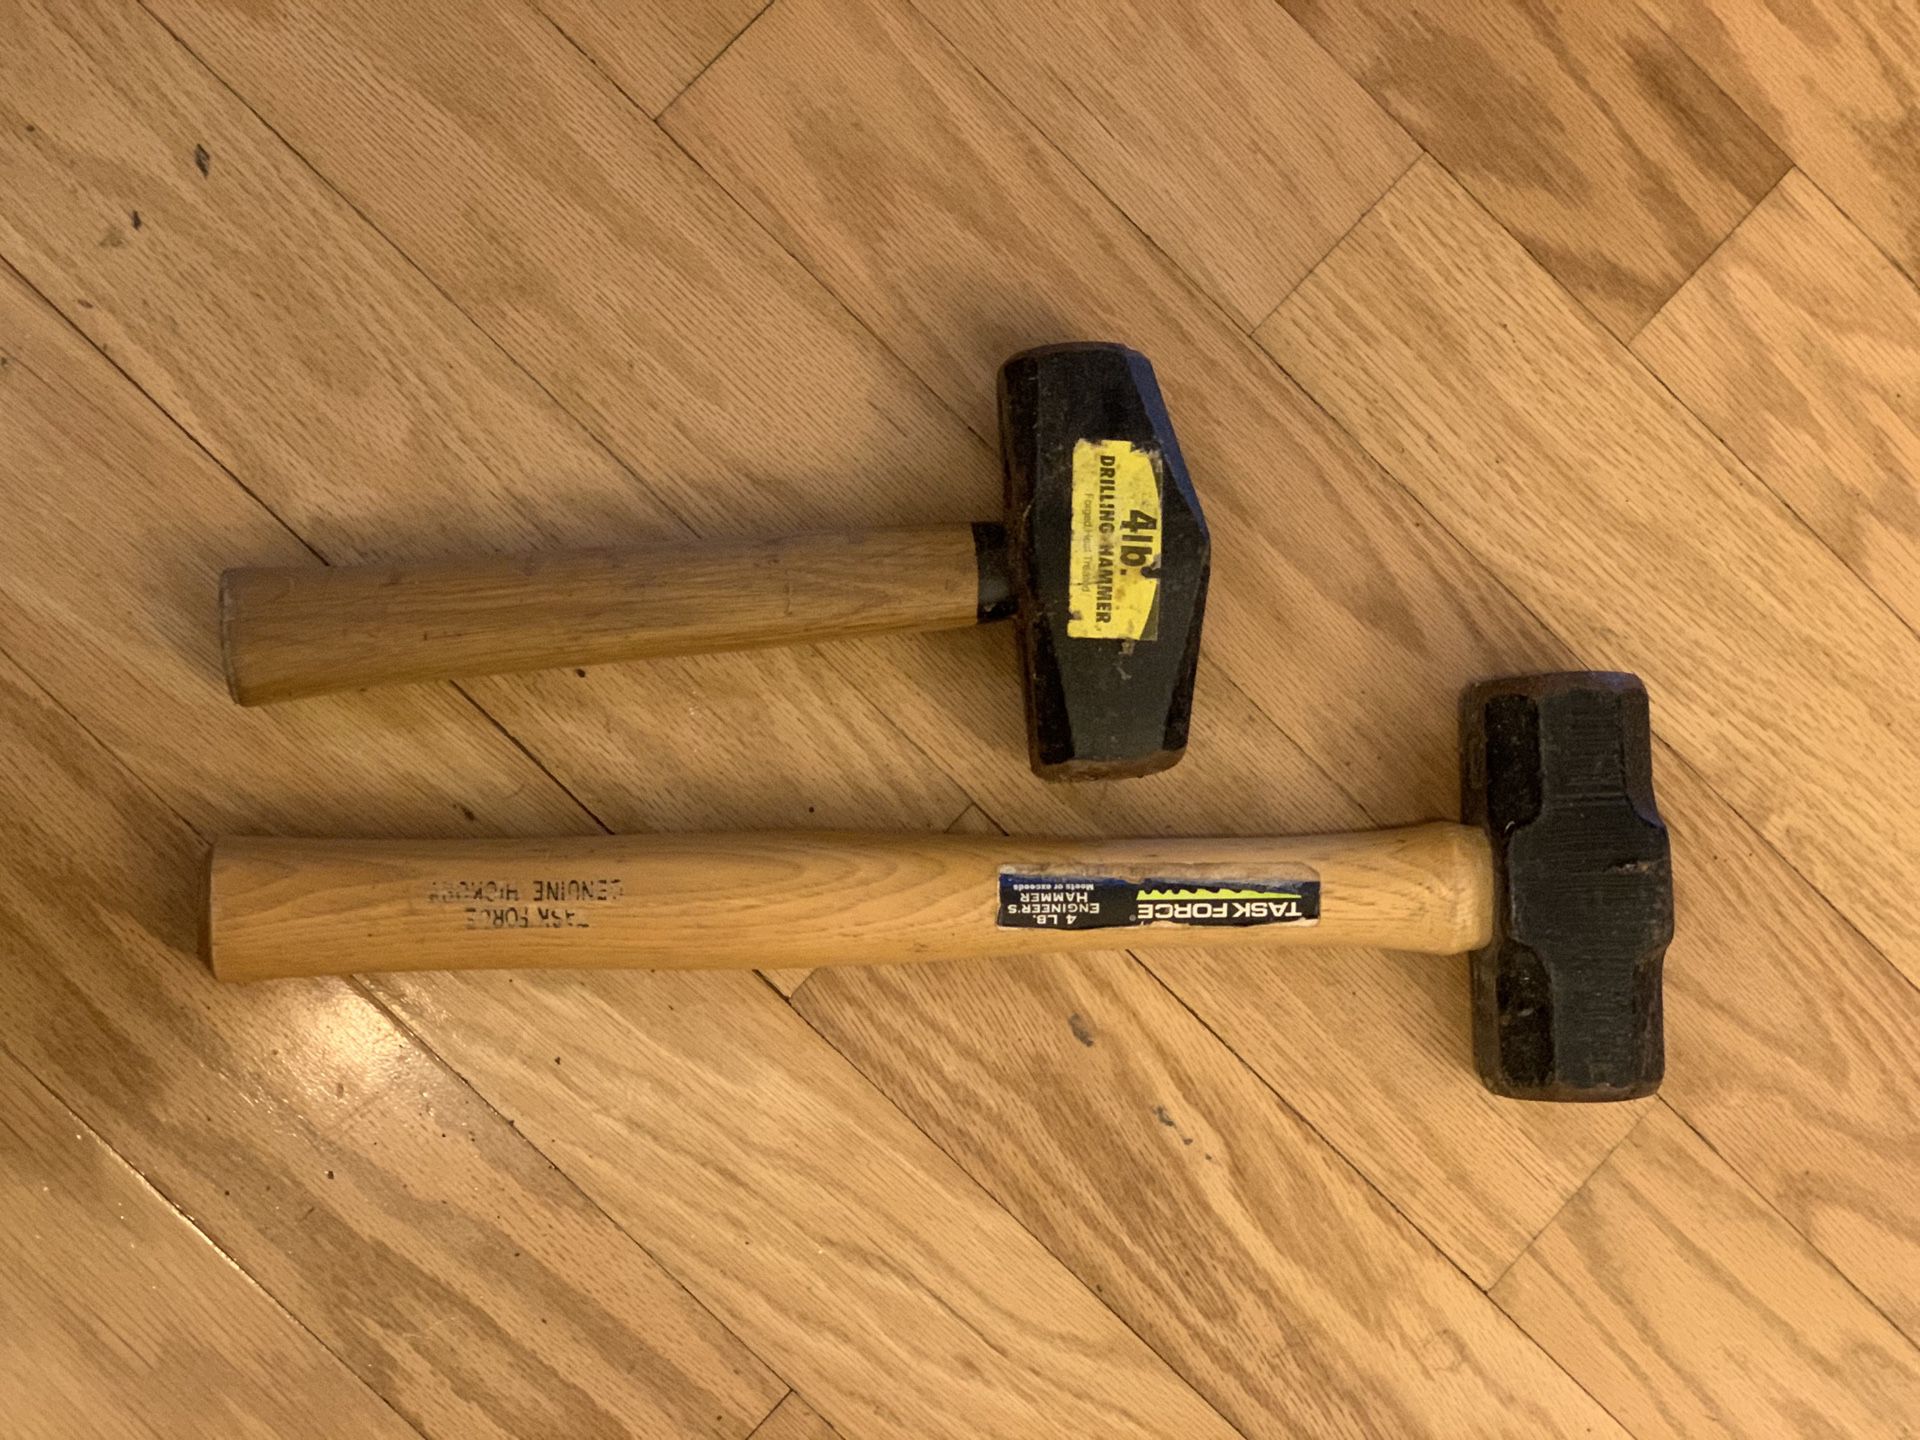 Two 4-lb. Engineer’s Hammers 16” and 10”